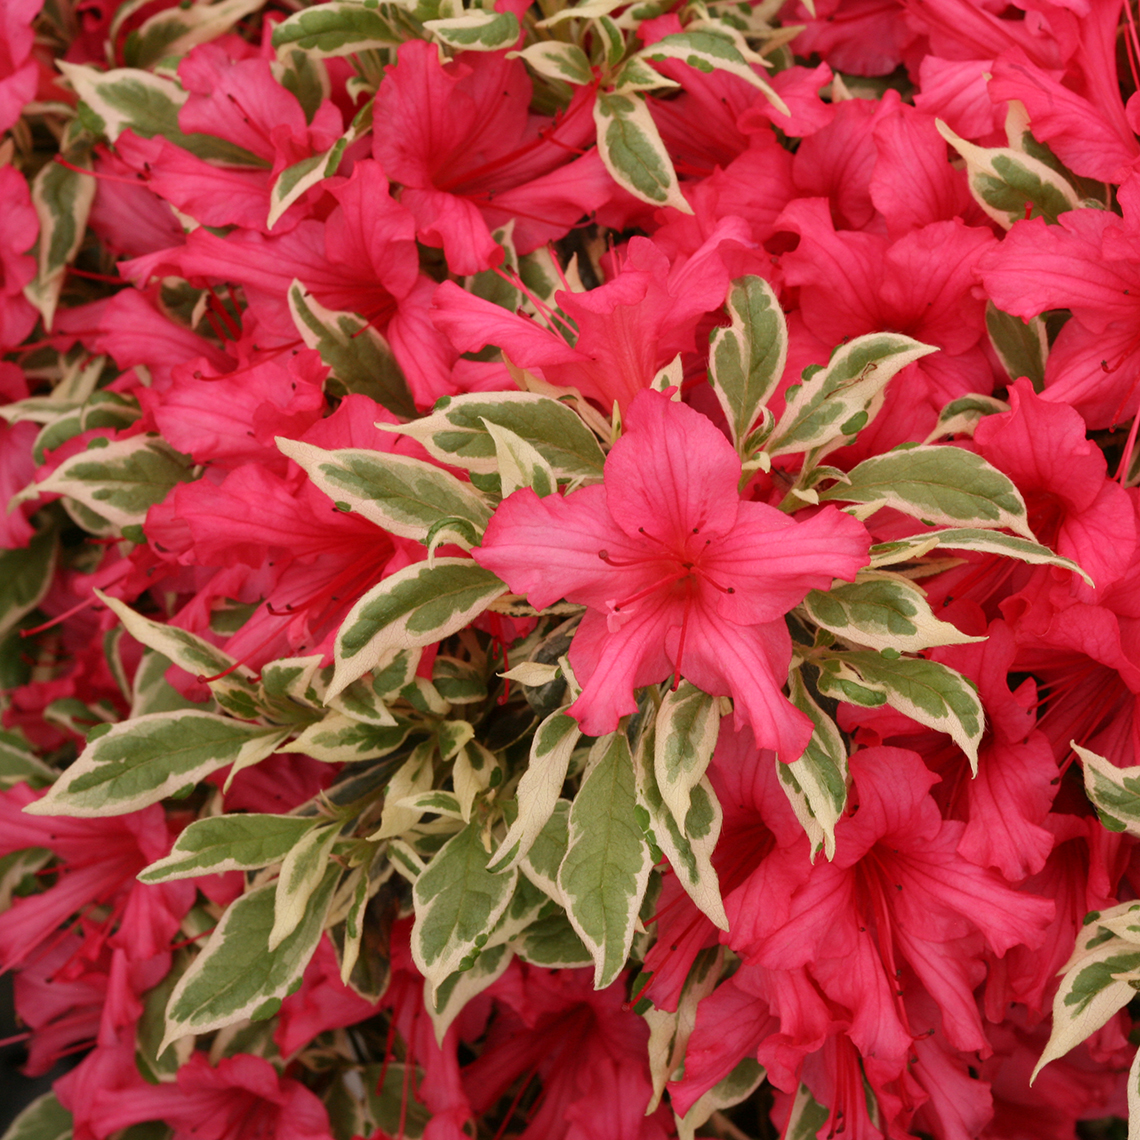 Close up of vibrant red pink Bollywood azalea blooms overlapping crisp green and white variegation